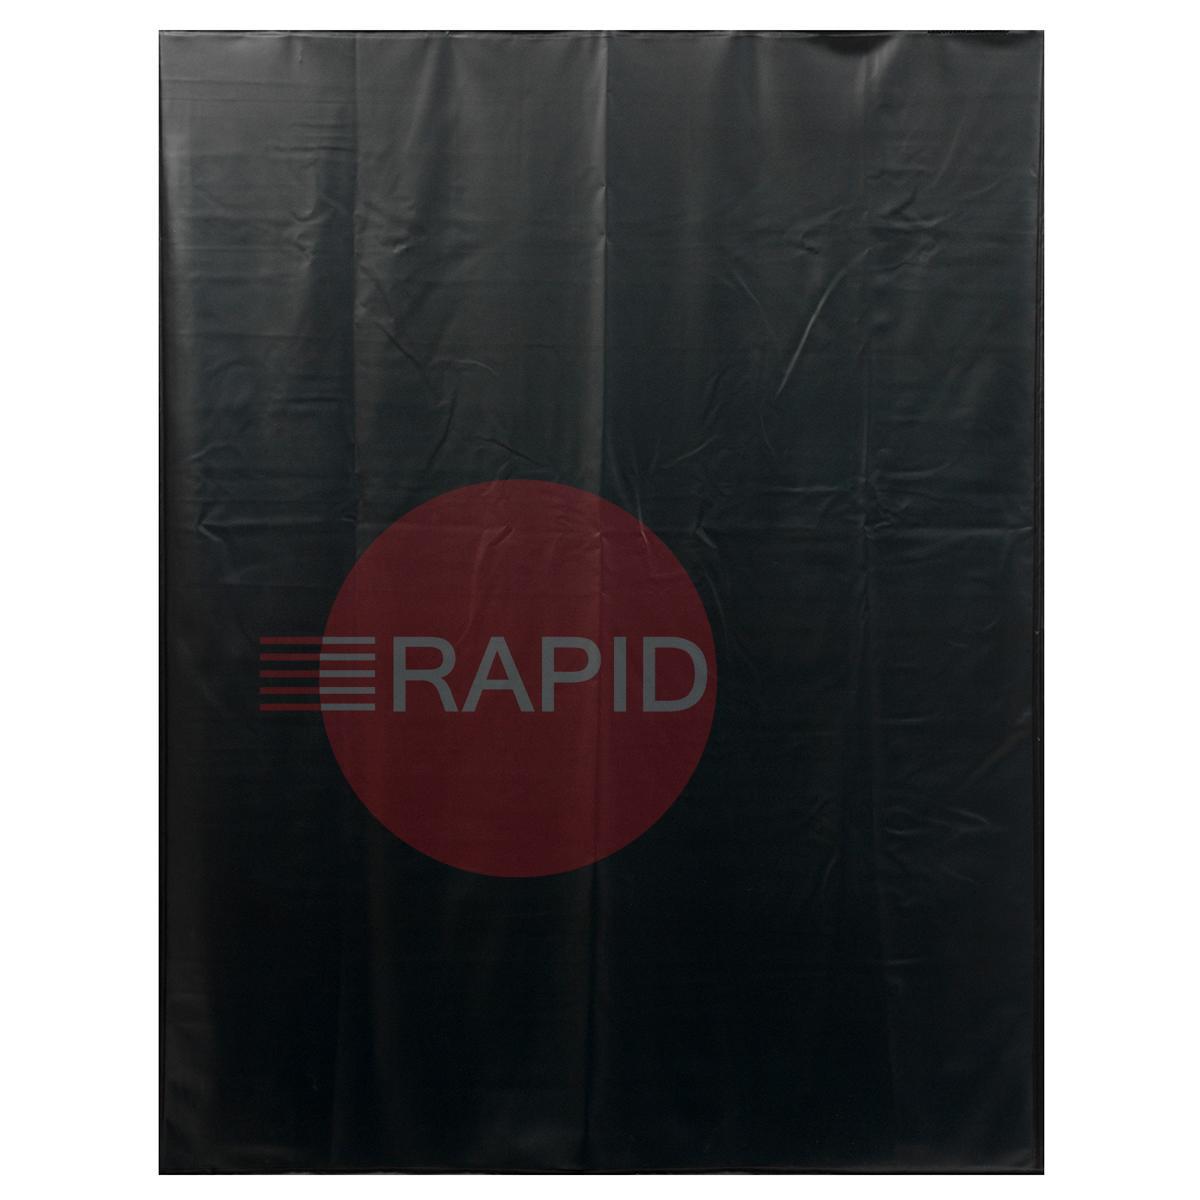 18.19.18  CEPRO Green-9 Replacement Curtain for Robusto Single Welding Screens - 2.2m x 1.8m, Approved EN 25980